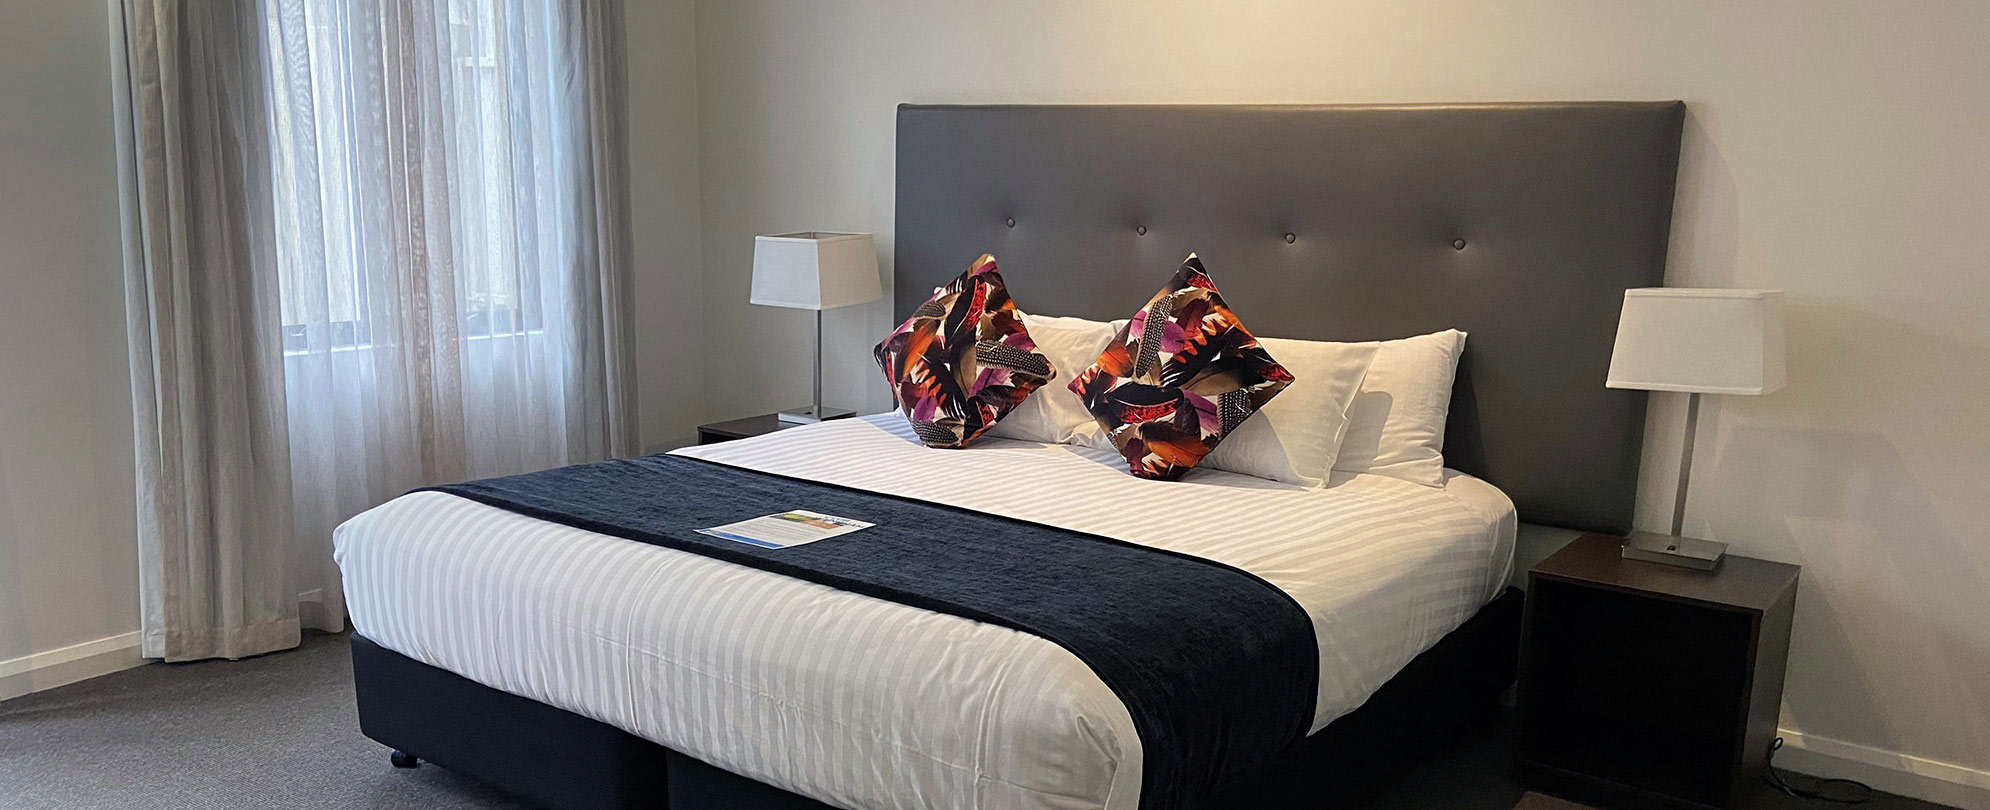 A king-sized bed neatly made inside a suite at Club Wyndham Perth.